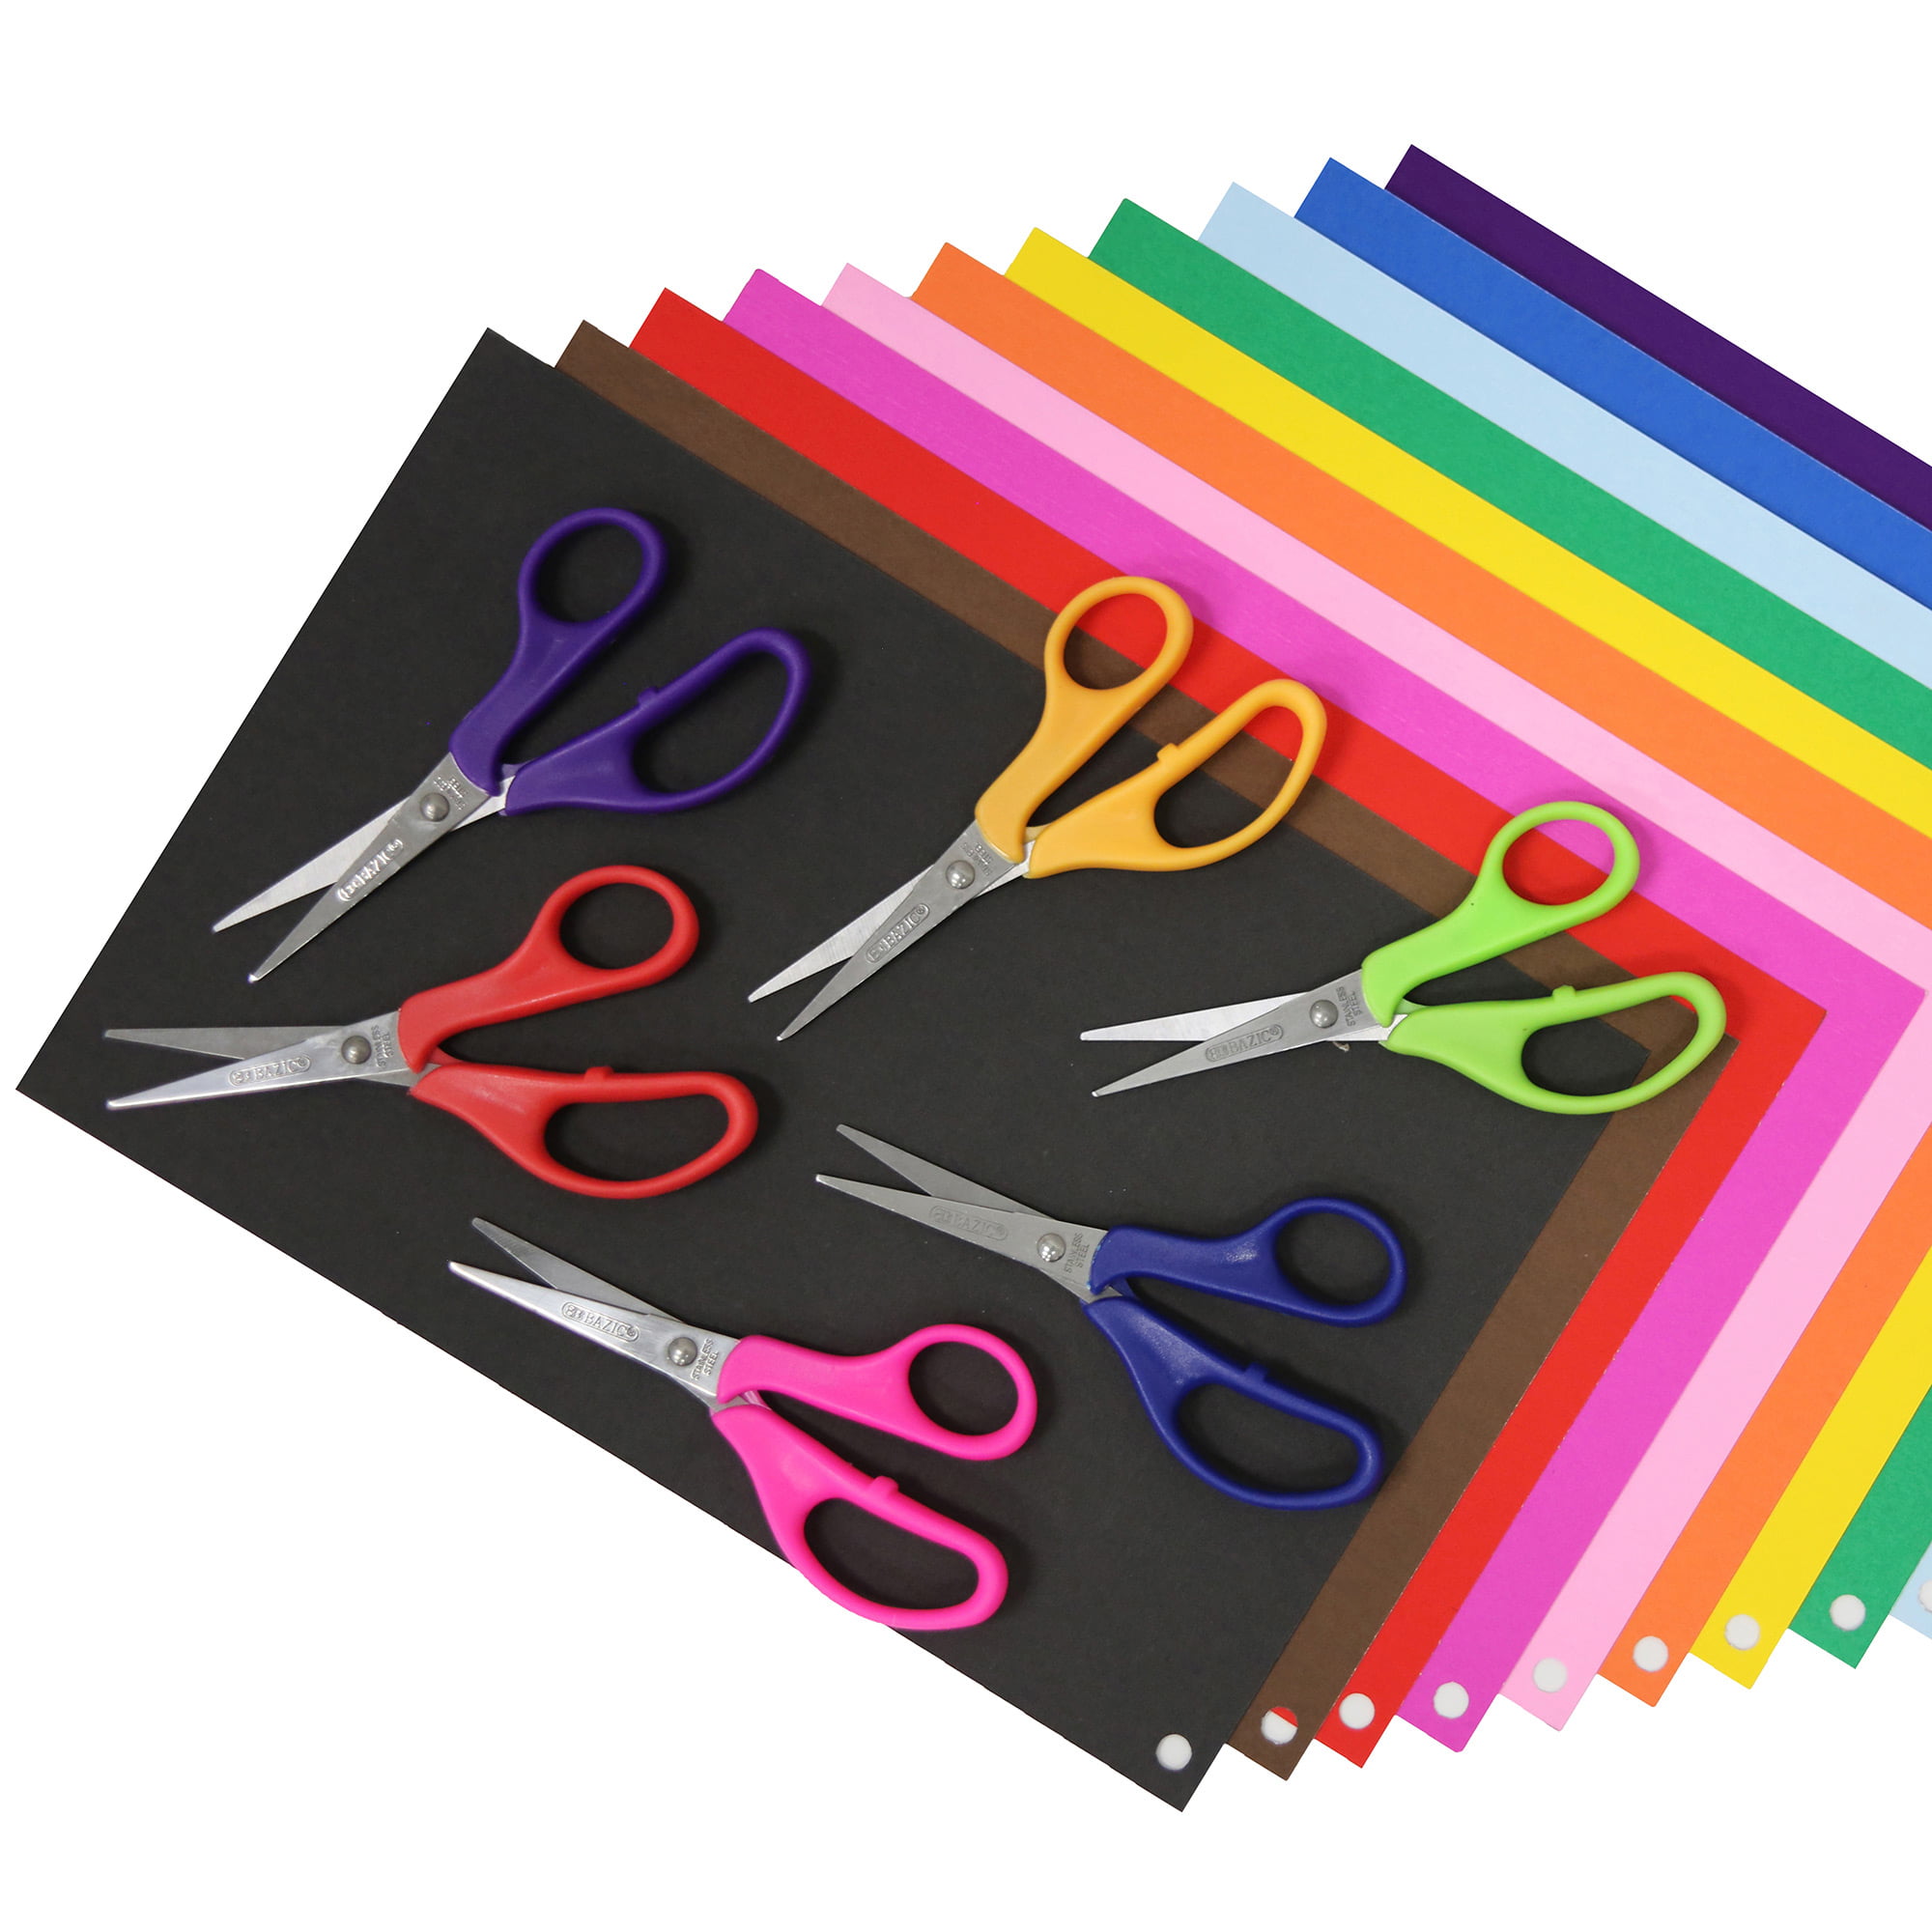 C2S Neon Poster Board in 8 Assorted Neon Colors, Graphic Arts Quality